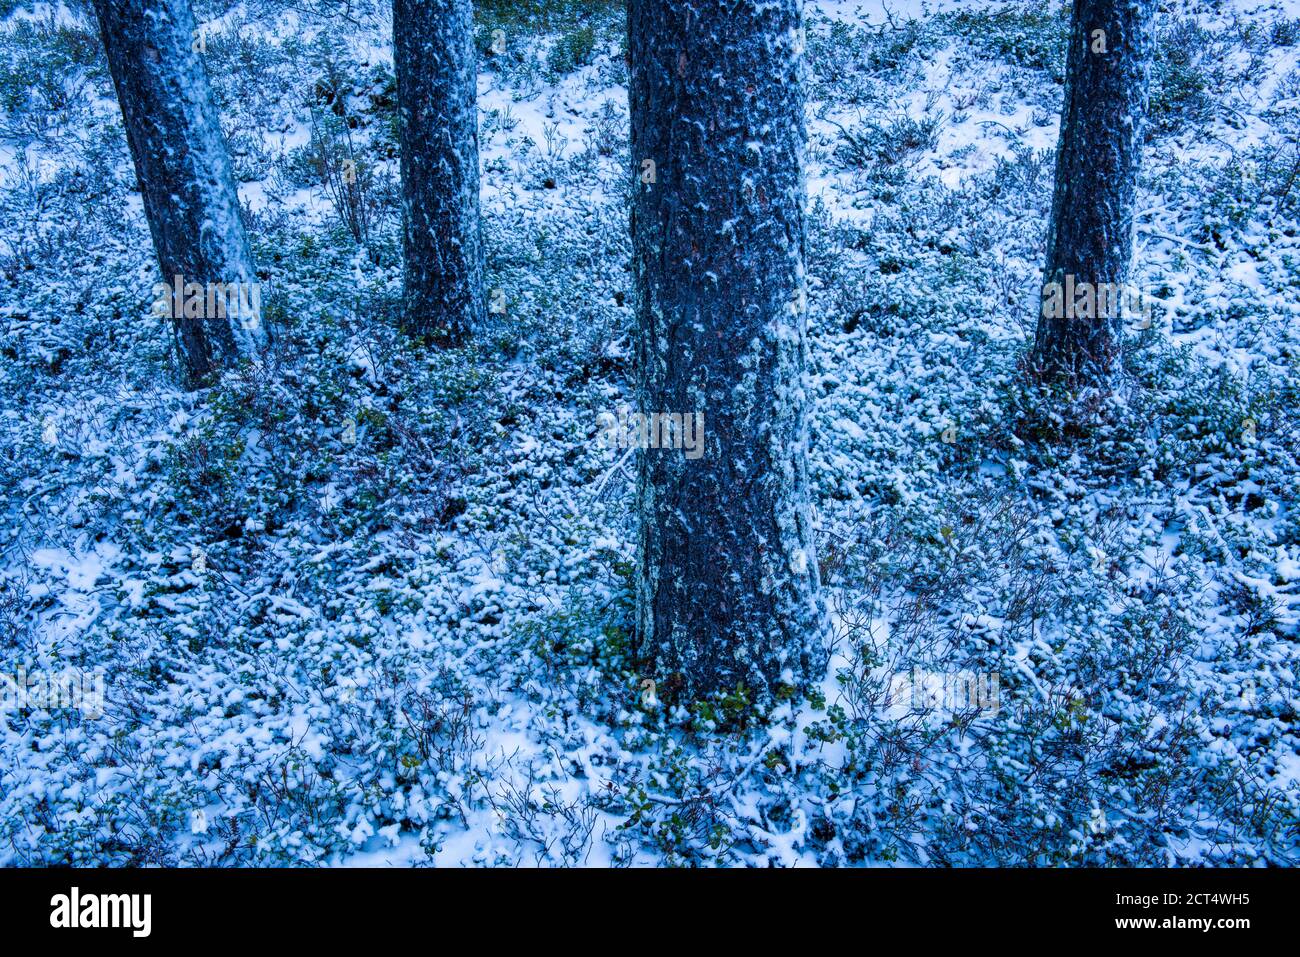 Winter landscape of ice covered frosty trees in a forest, Akaslompolo, Lapland, Finland Stock Photo